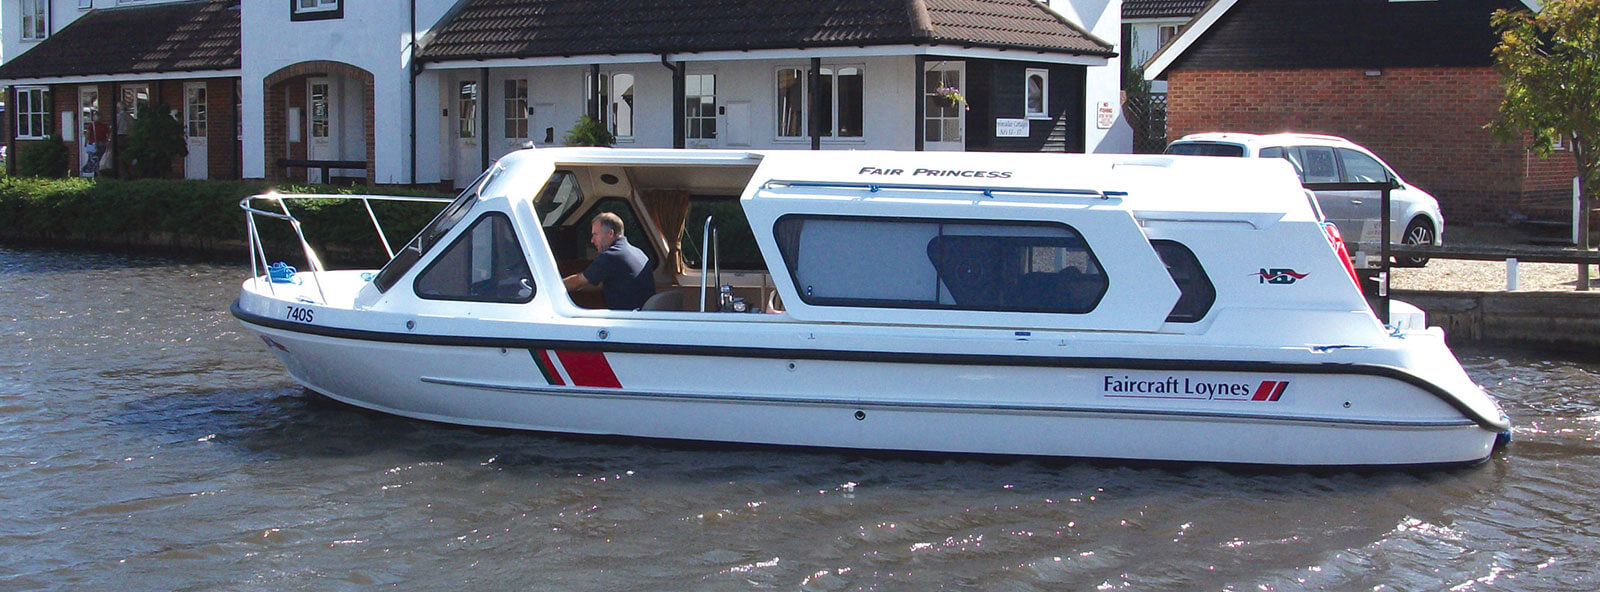 A sideways view of a cruiser for hire on the Broads